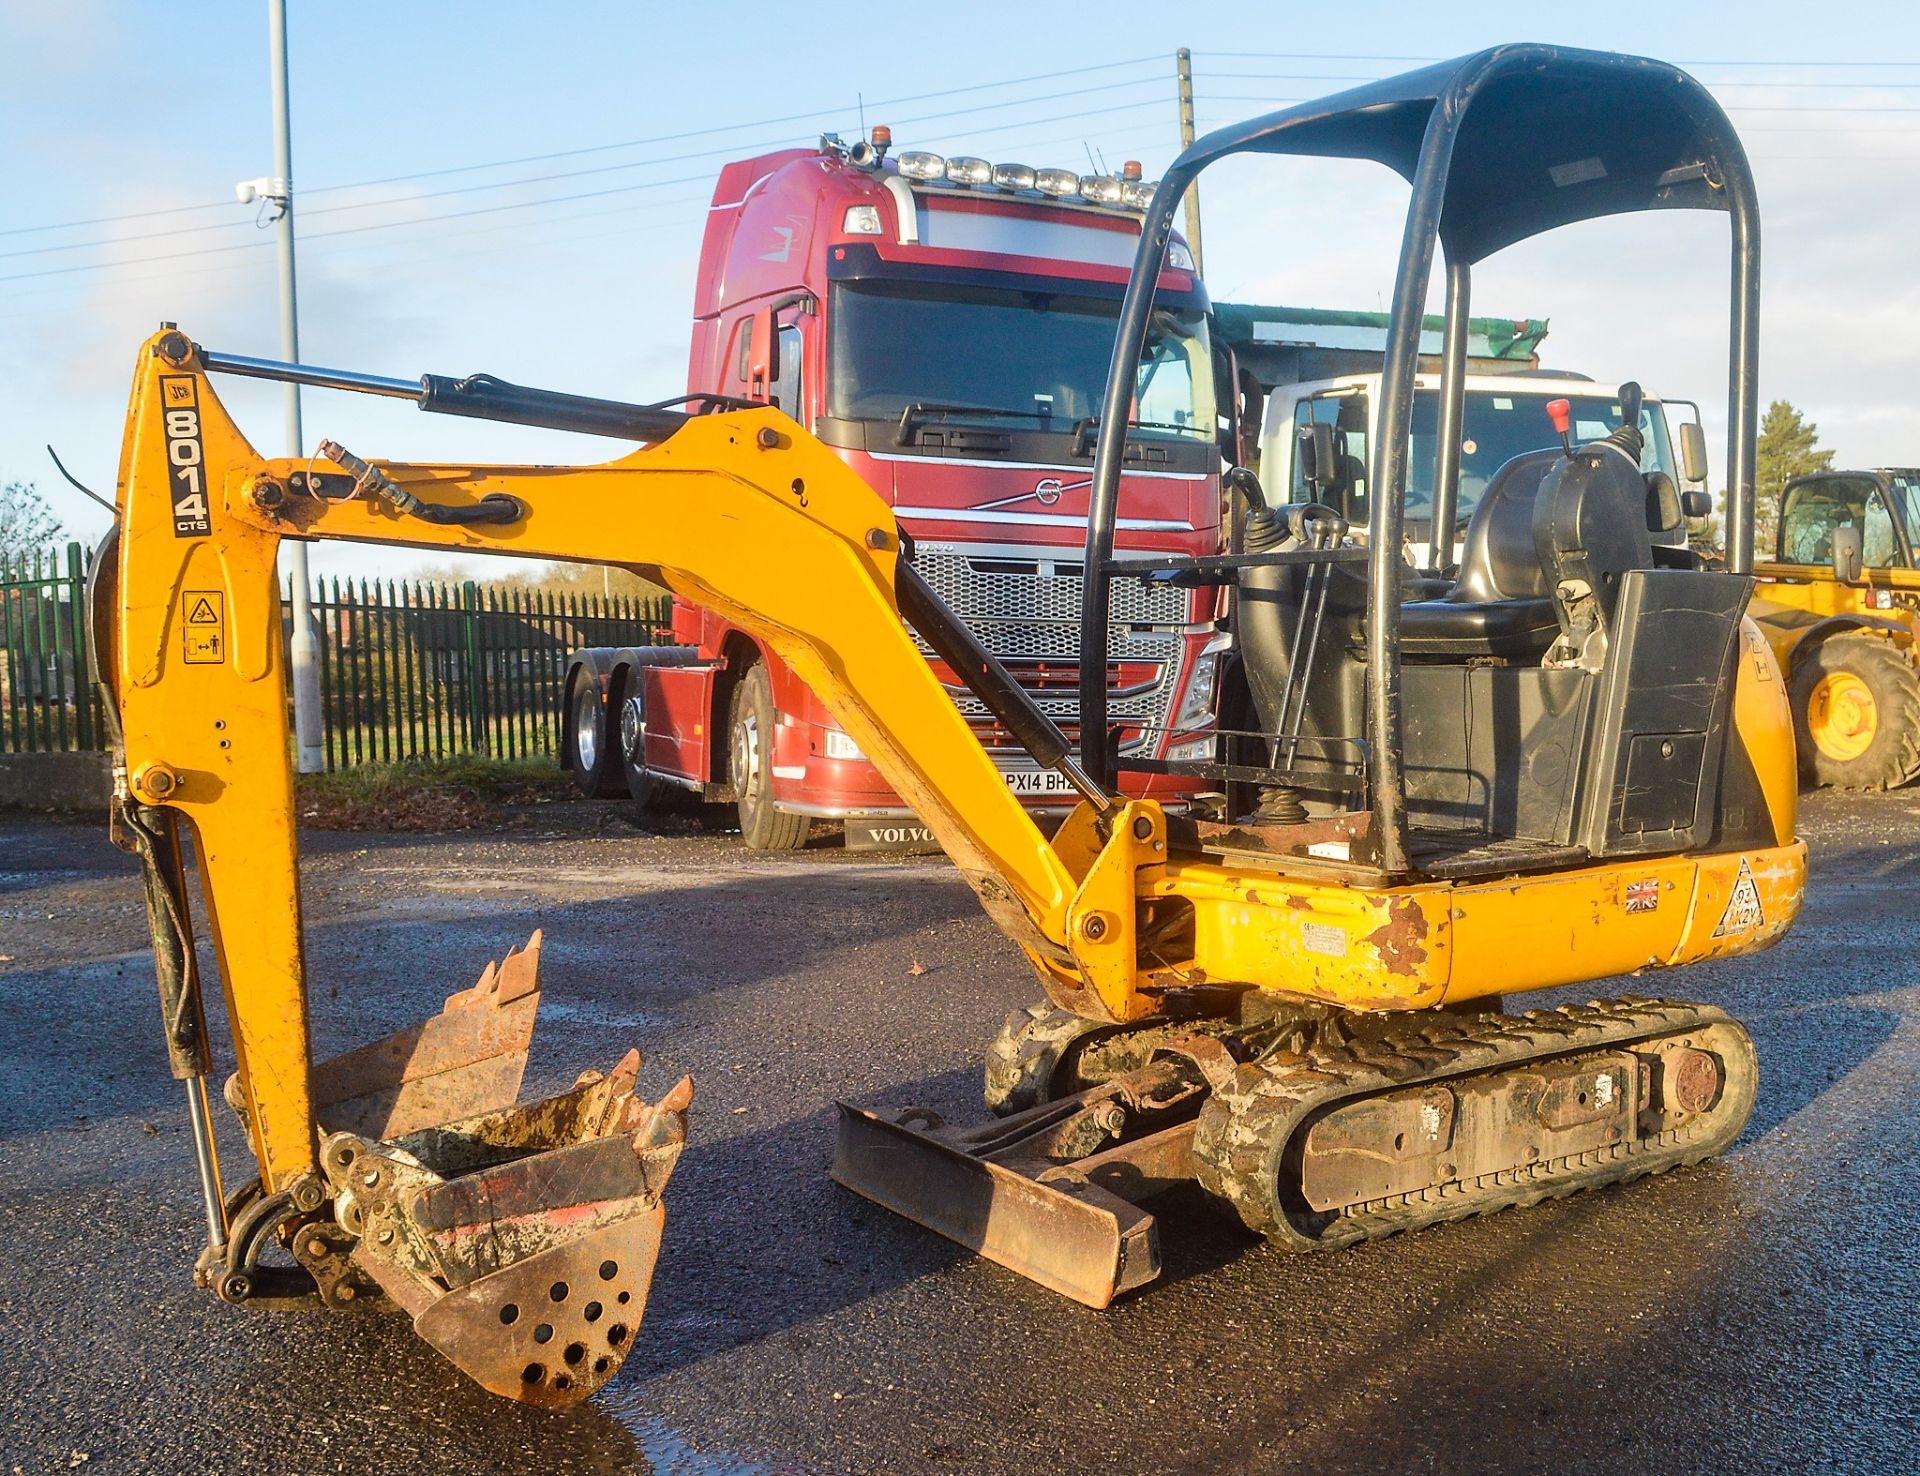 JCB 801.4 CTS 1.5 tonne rubber tracked mini excavator Year: 2014 S/N: 2070315 Recorded Hours: 1512